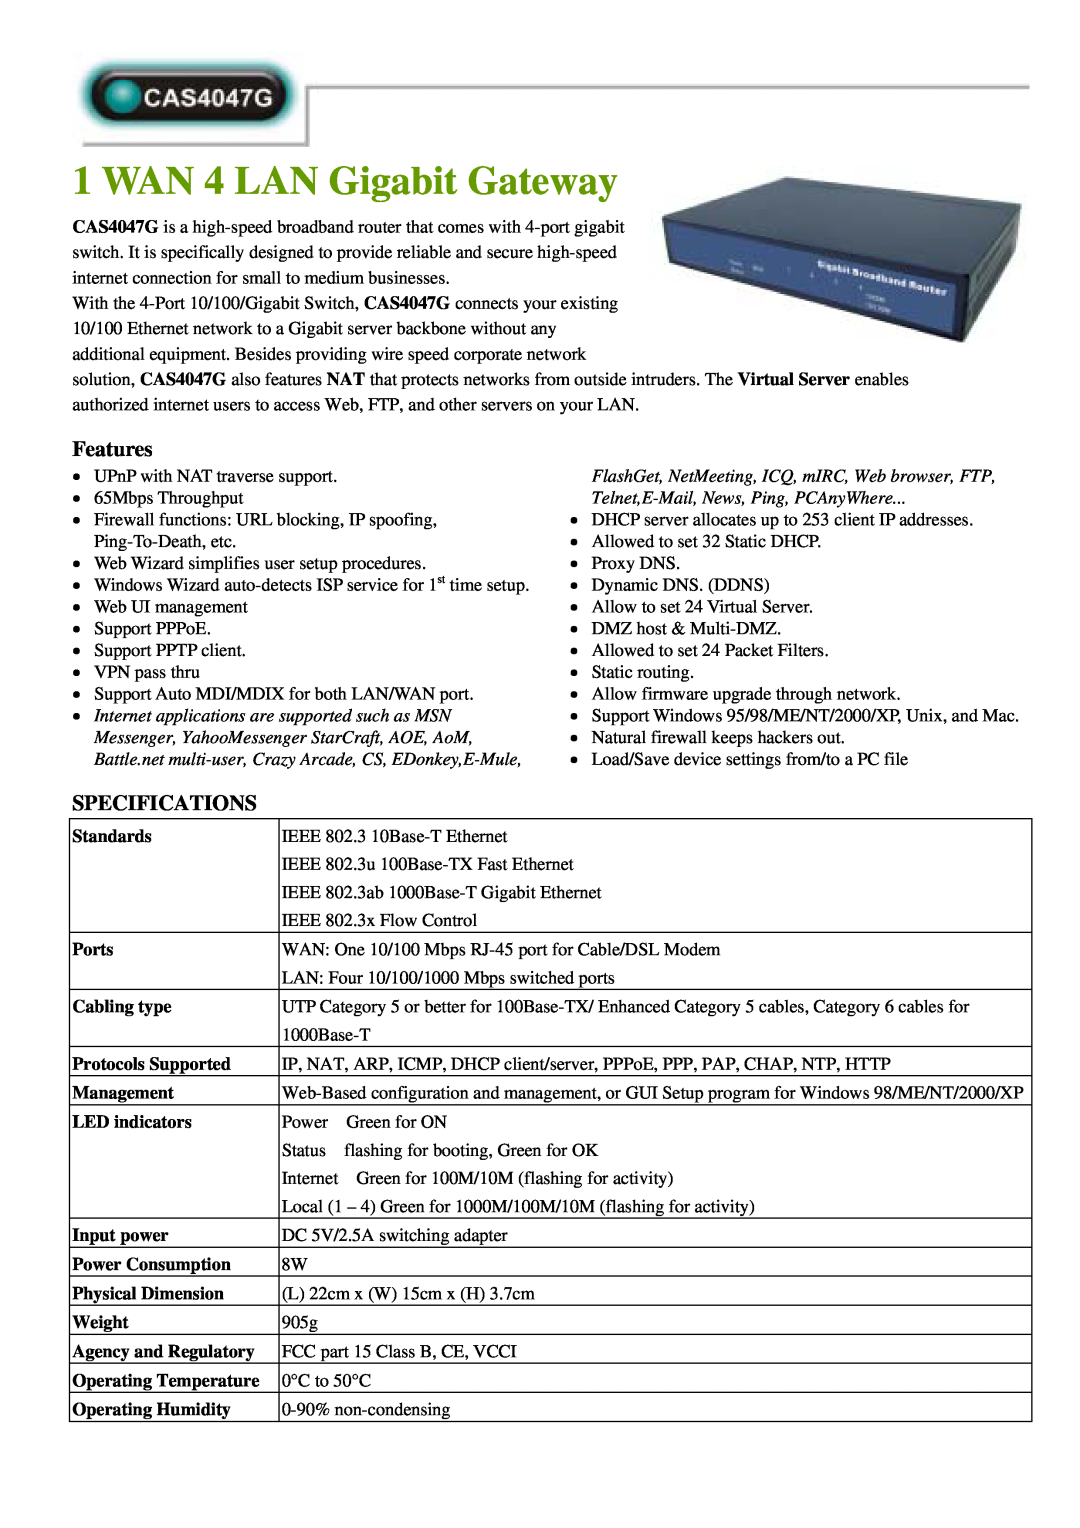 Abocom CAS4047G specifications WAN 4 LAN Gigabit Gateway, Features, Specifications, Telnet,E-Mail, News, Ping, PCAnyWhere 